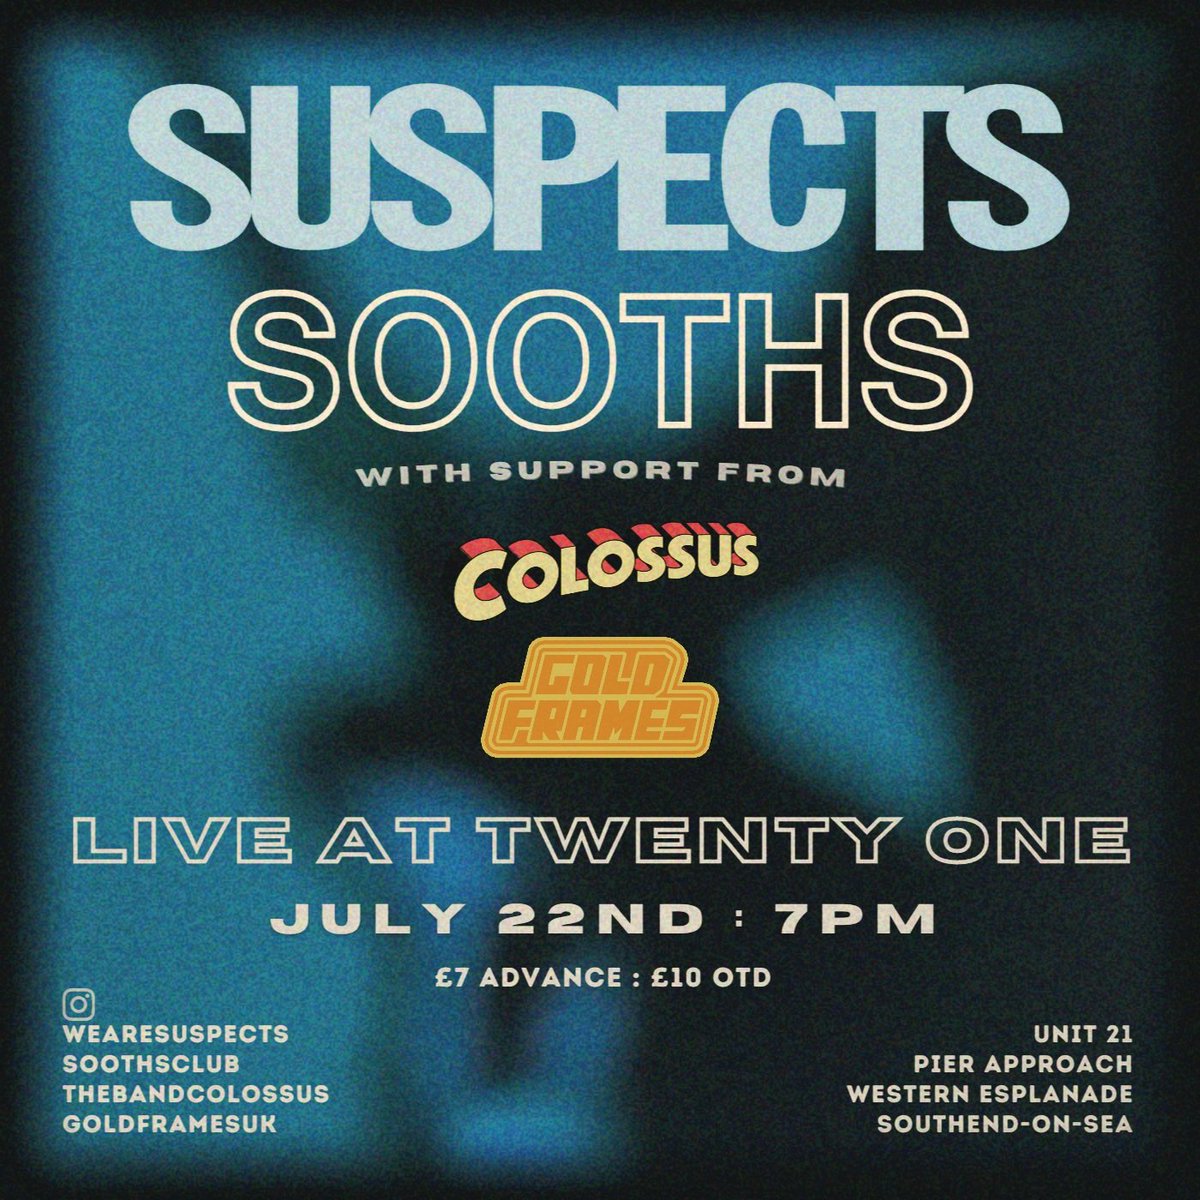 We are stoked to announce our live return to Southend on July 22nd at Twenty One.

Joining us are the mighty SOOTHS, @thebandcolossus and @GoldFramesUK

We can't wait for this.
Tickets available via this link:

ticketsource.co.uk/suspects/suspe…

#anothercoolthing 
#suspects2023